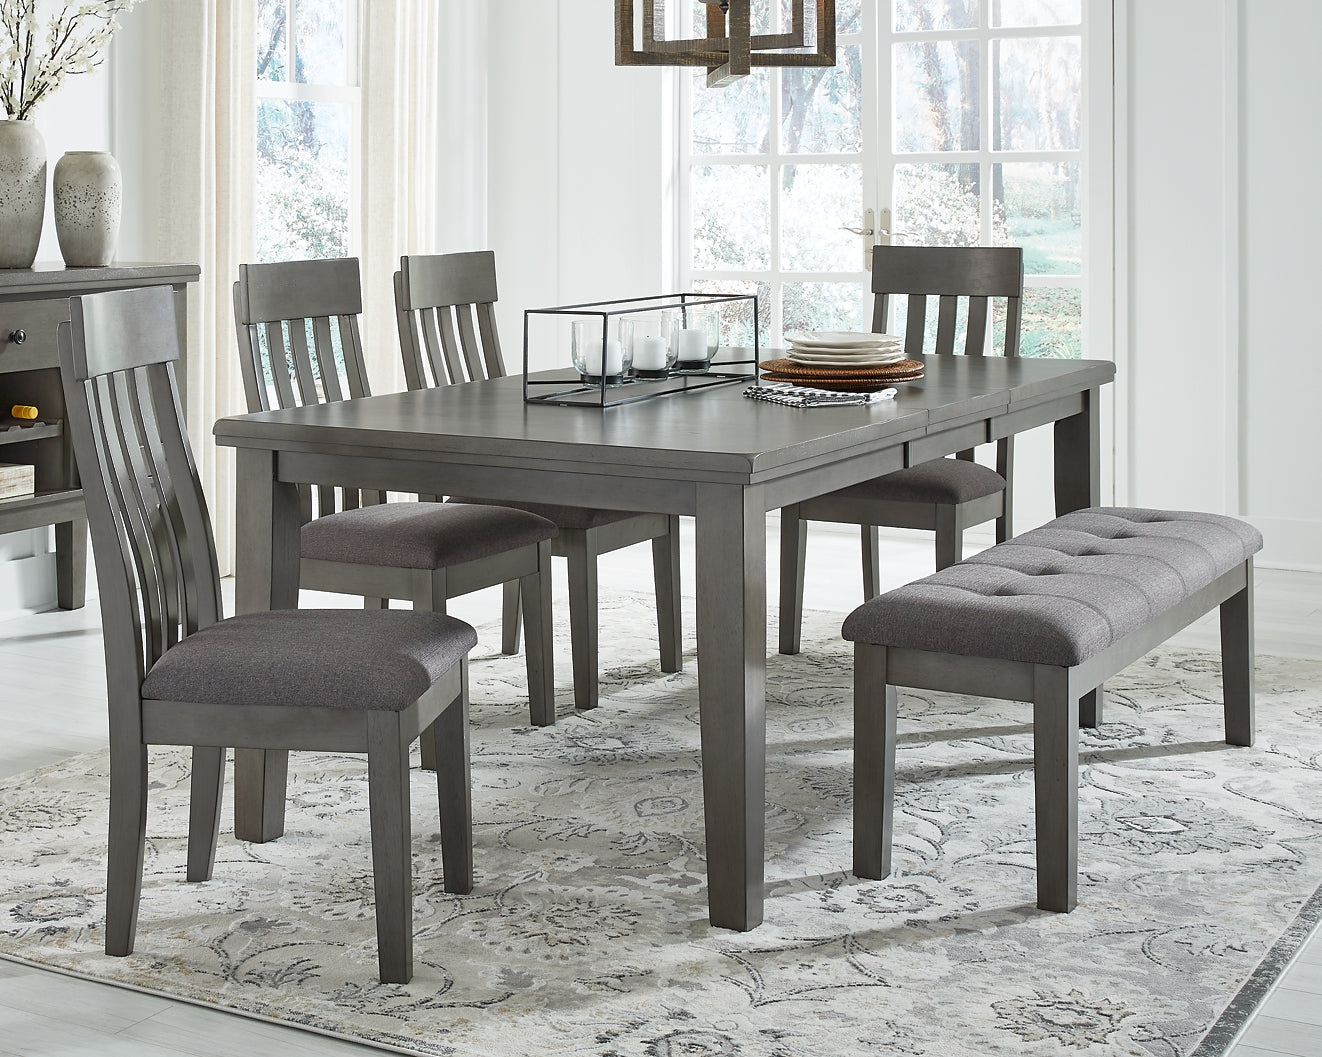 Hallanden Dining Table and 4 Chairs and Bench with Storage Wilson Furniture (OH)  in Bridgeport, Ohio. Serving Bridgeport, Yorkville, Bellaire, & Avondale